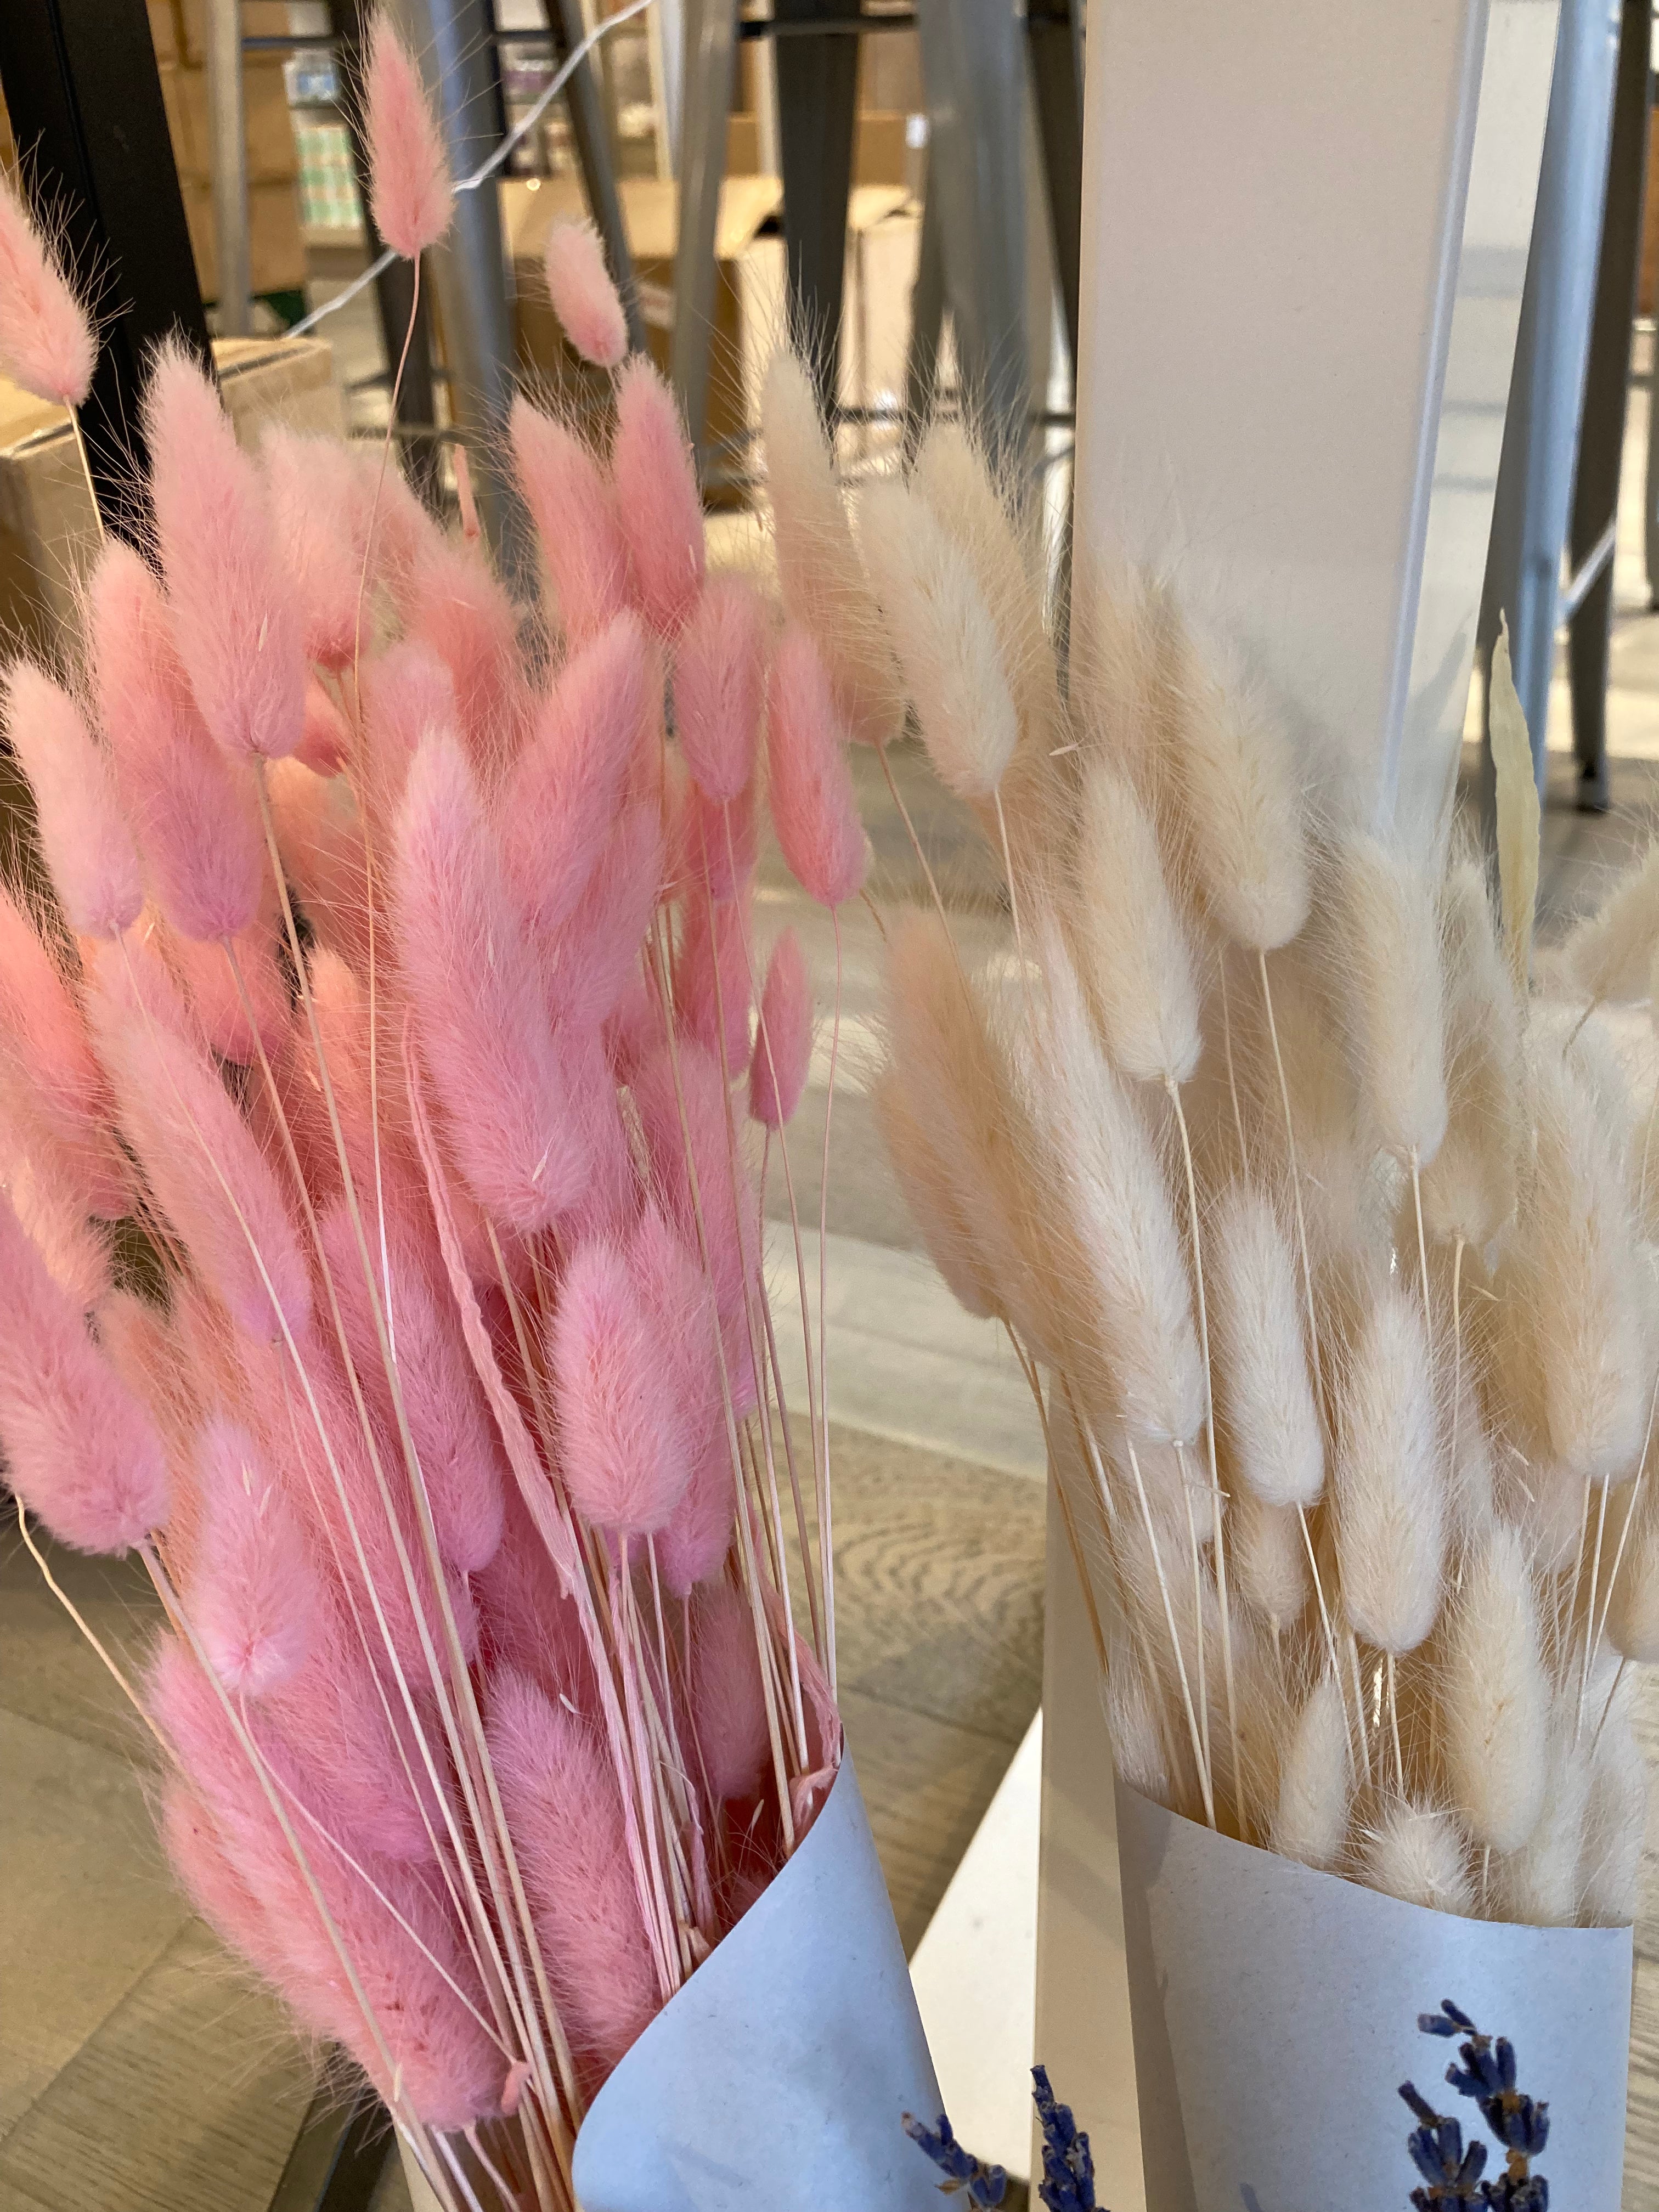 Dried Flower Bunny Tails